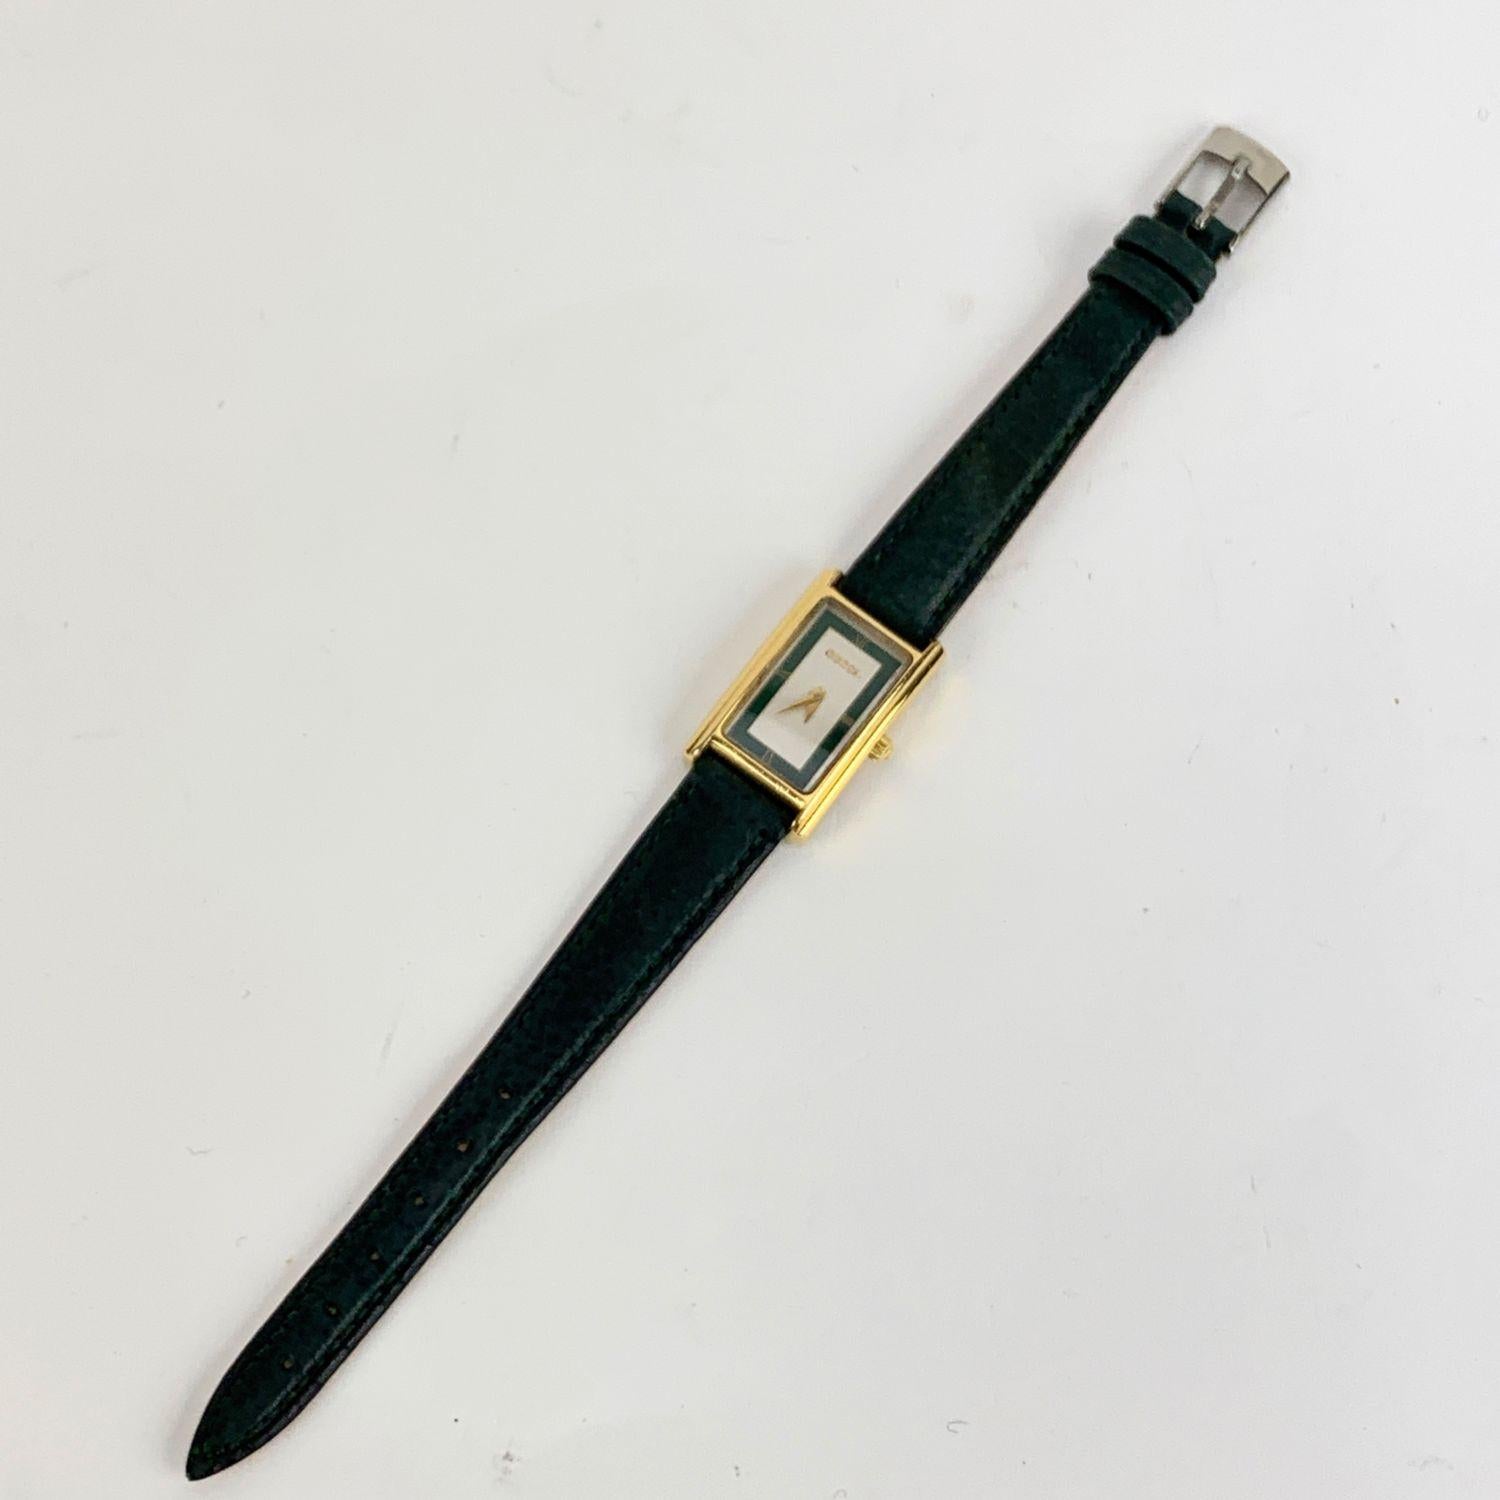 Beautiful vintage wristwatch by GUCCI, Mod. 2600 L. Rectangular gold metal stainless steel case. Swiss Made Quartz Movement. Green leather wrist strap with 6 holes adjustment. White and green dial with roman numbers. 'GUCCI' lettering on the dial.